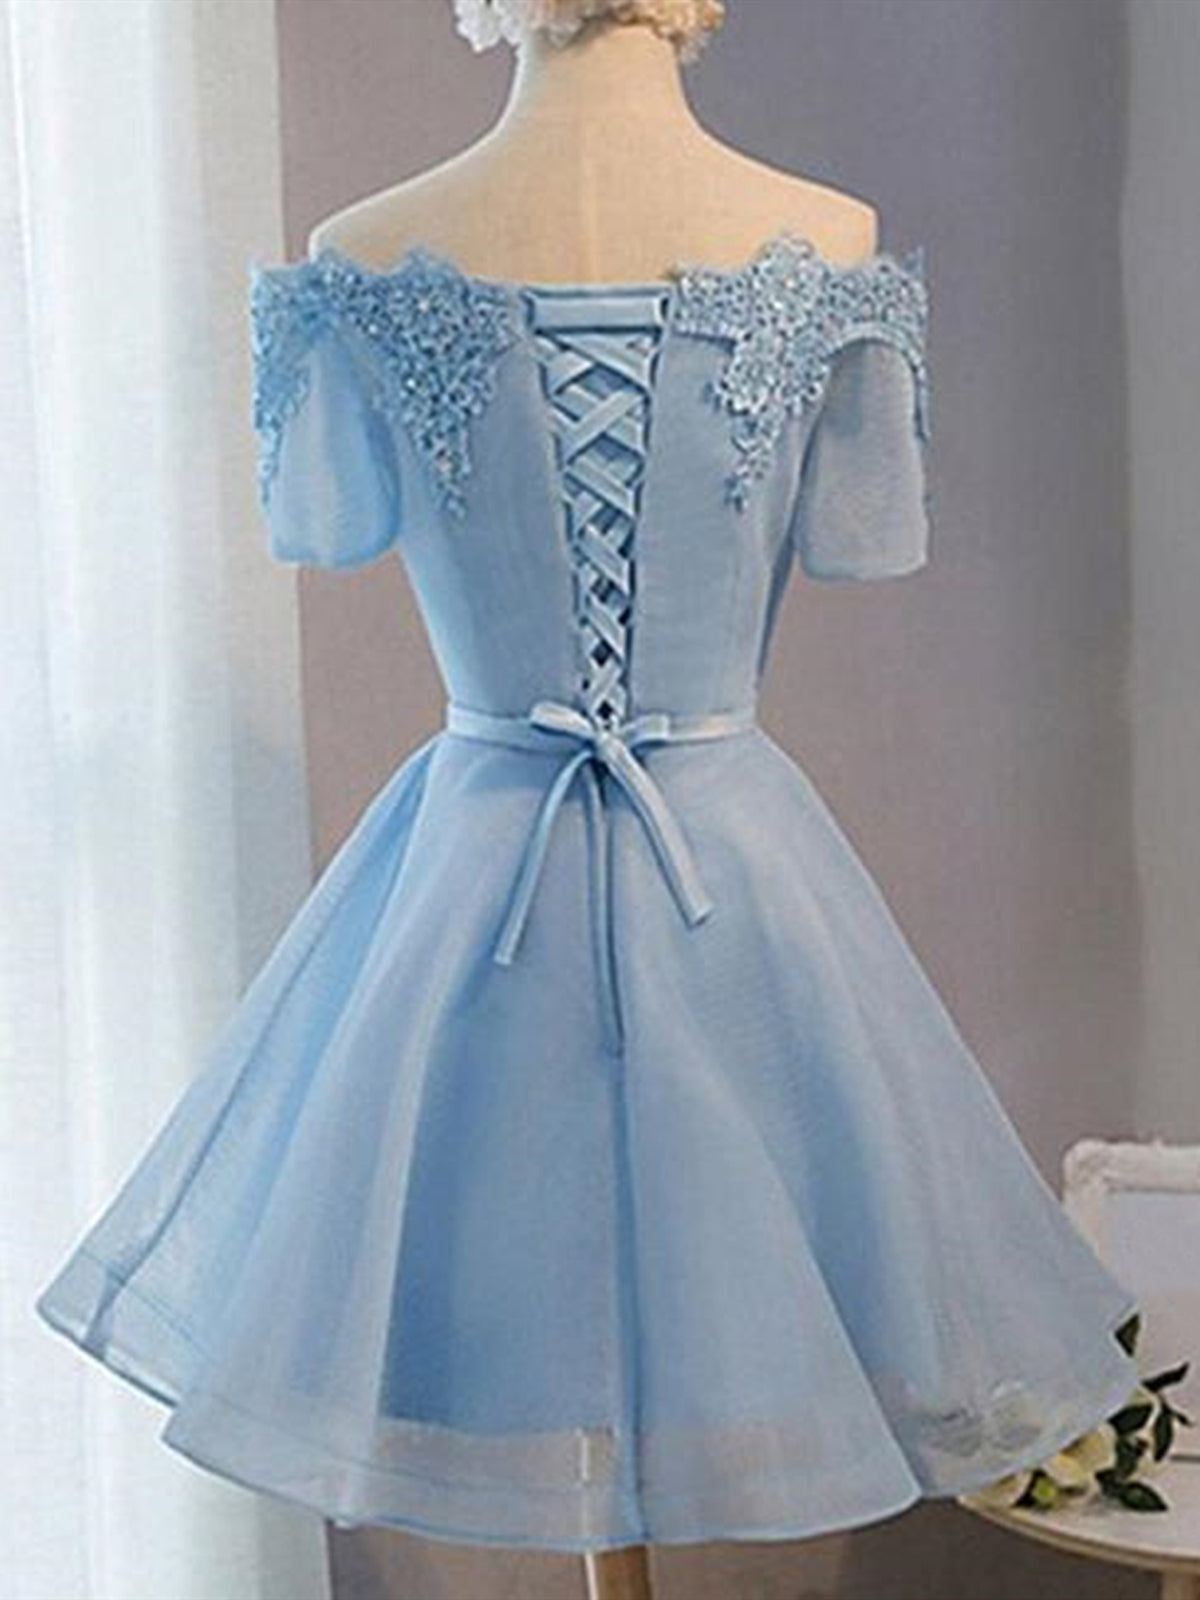 Prom Dresses Uk, Short Sleeves Short Blue Prom Dresses with Lace-up, Short Blue Homecoming Graduation Dresses